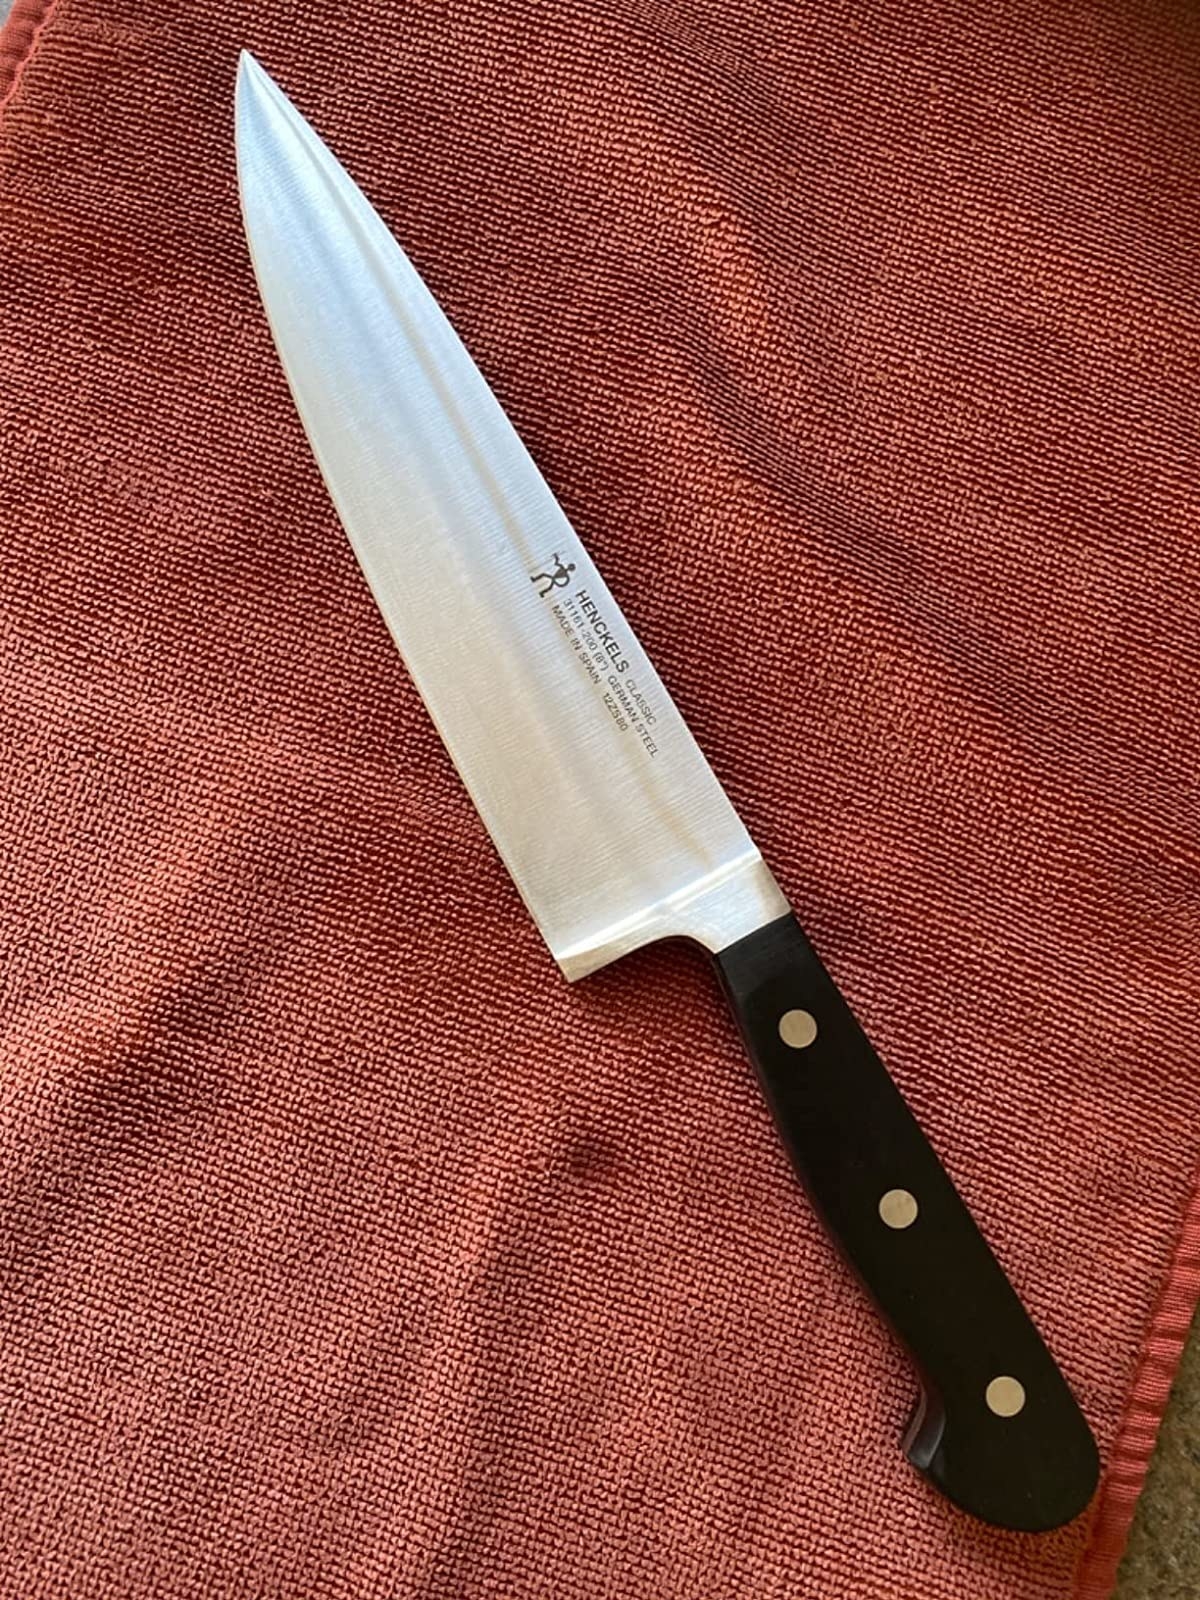 reviewer photo of the knife on a red towel